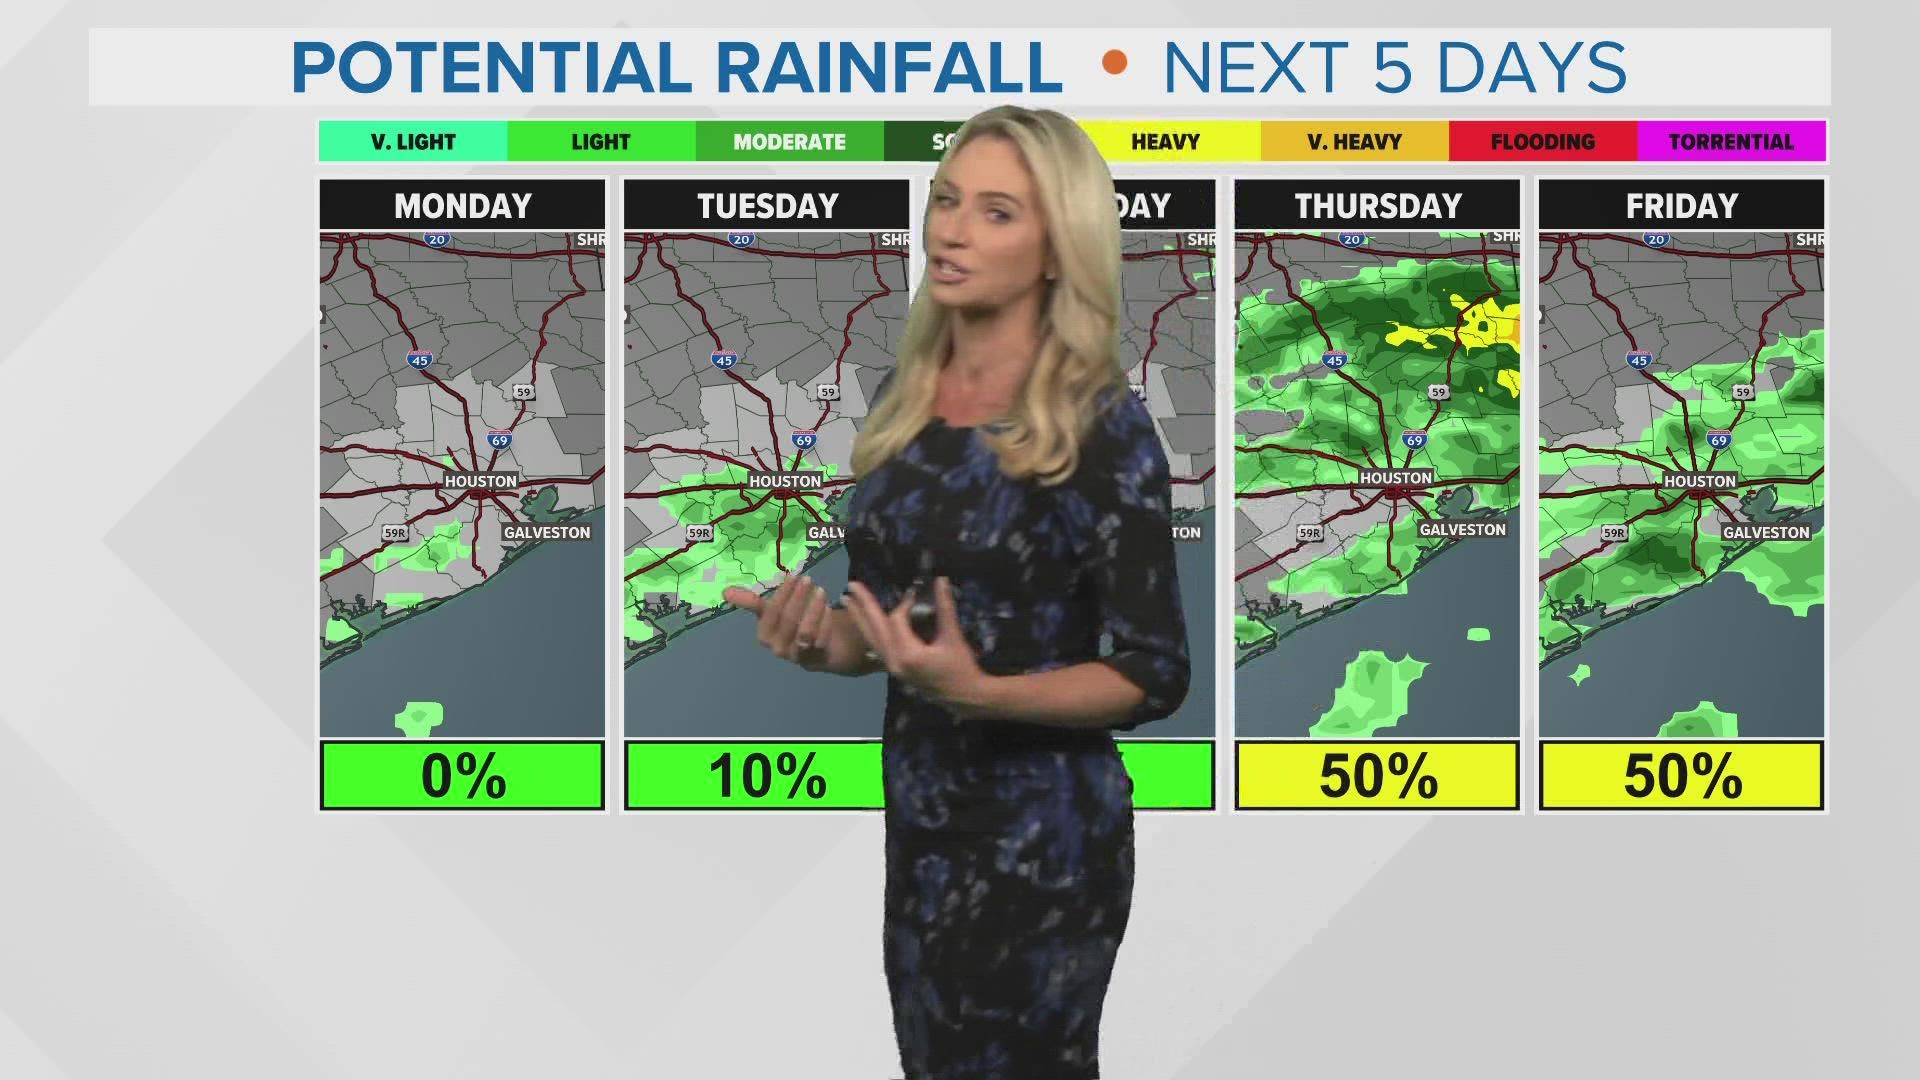 Rain is set to return later this week on Thursday and Friday.